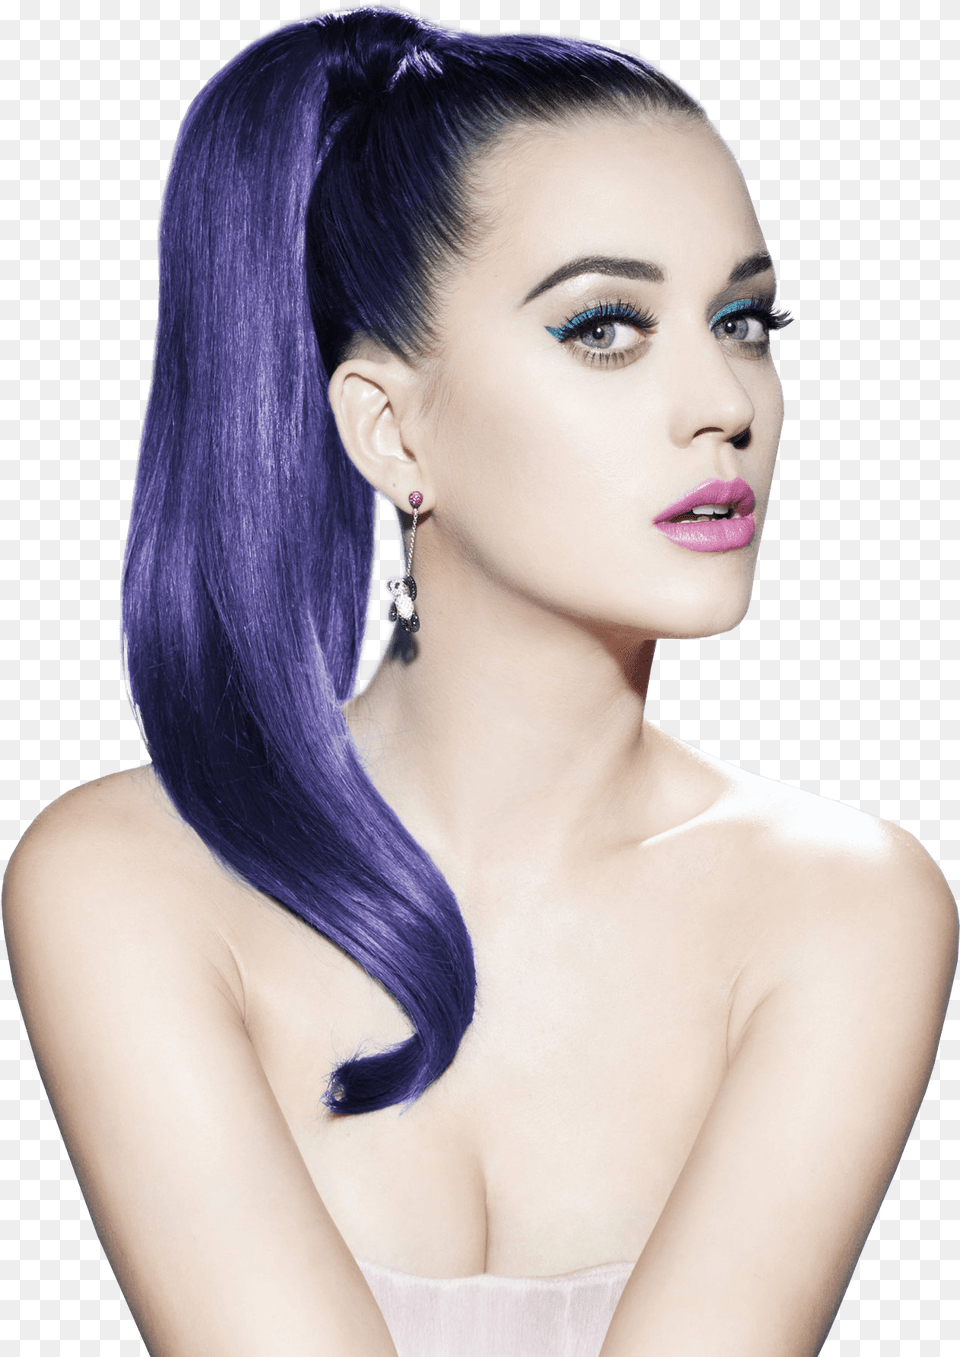 Katy Perry 2012 Photoshoot, Adult, Female, Person, Woman Png Image